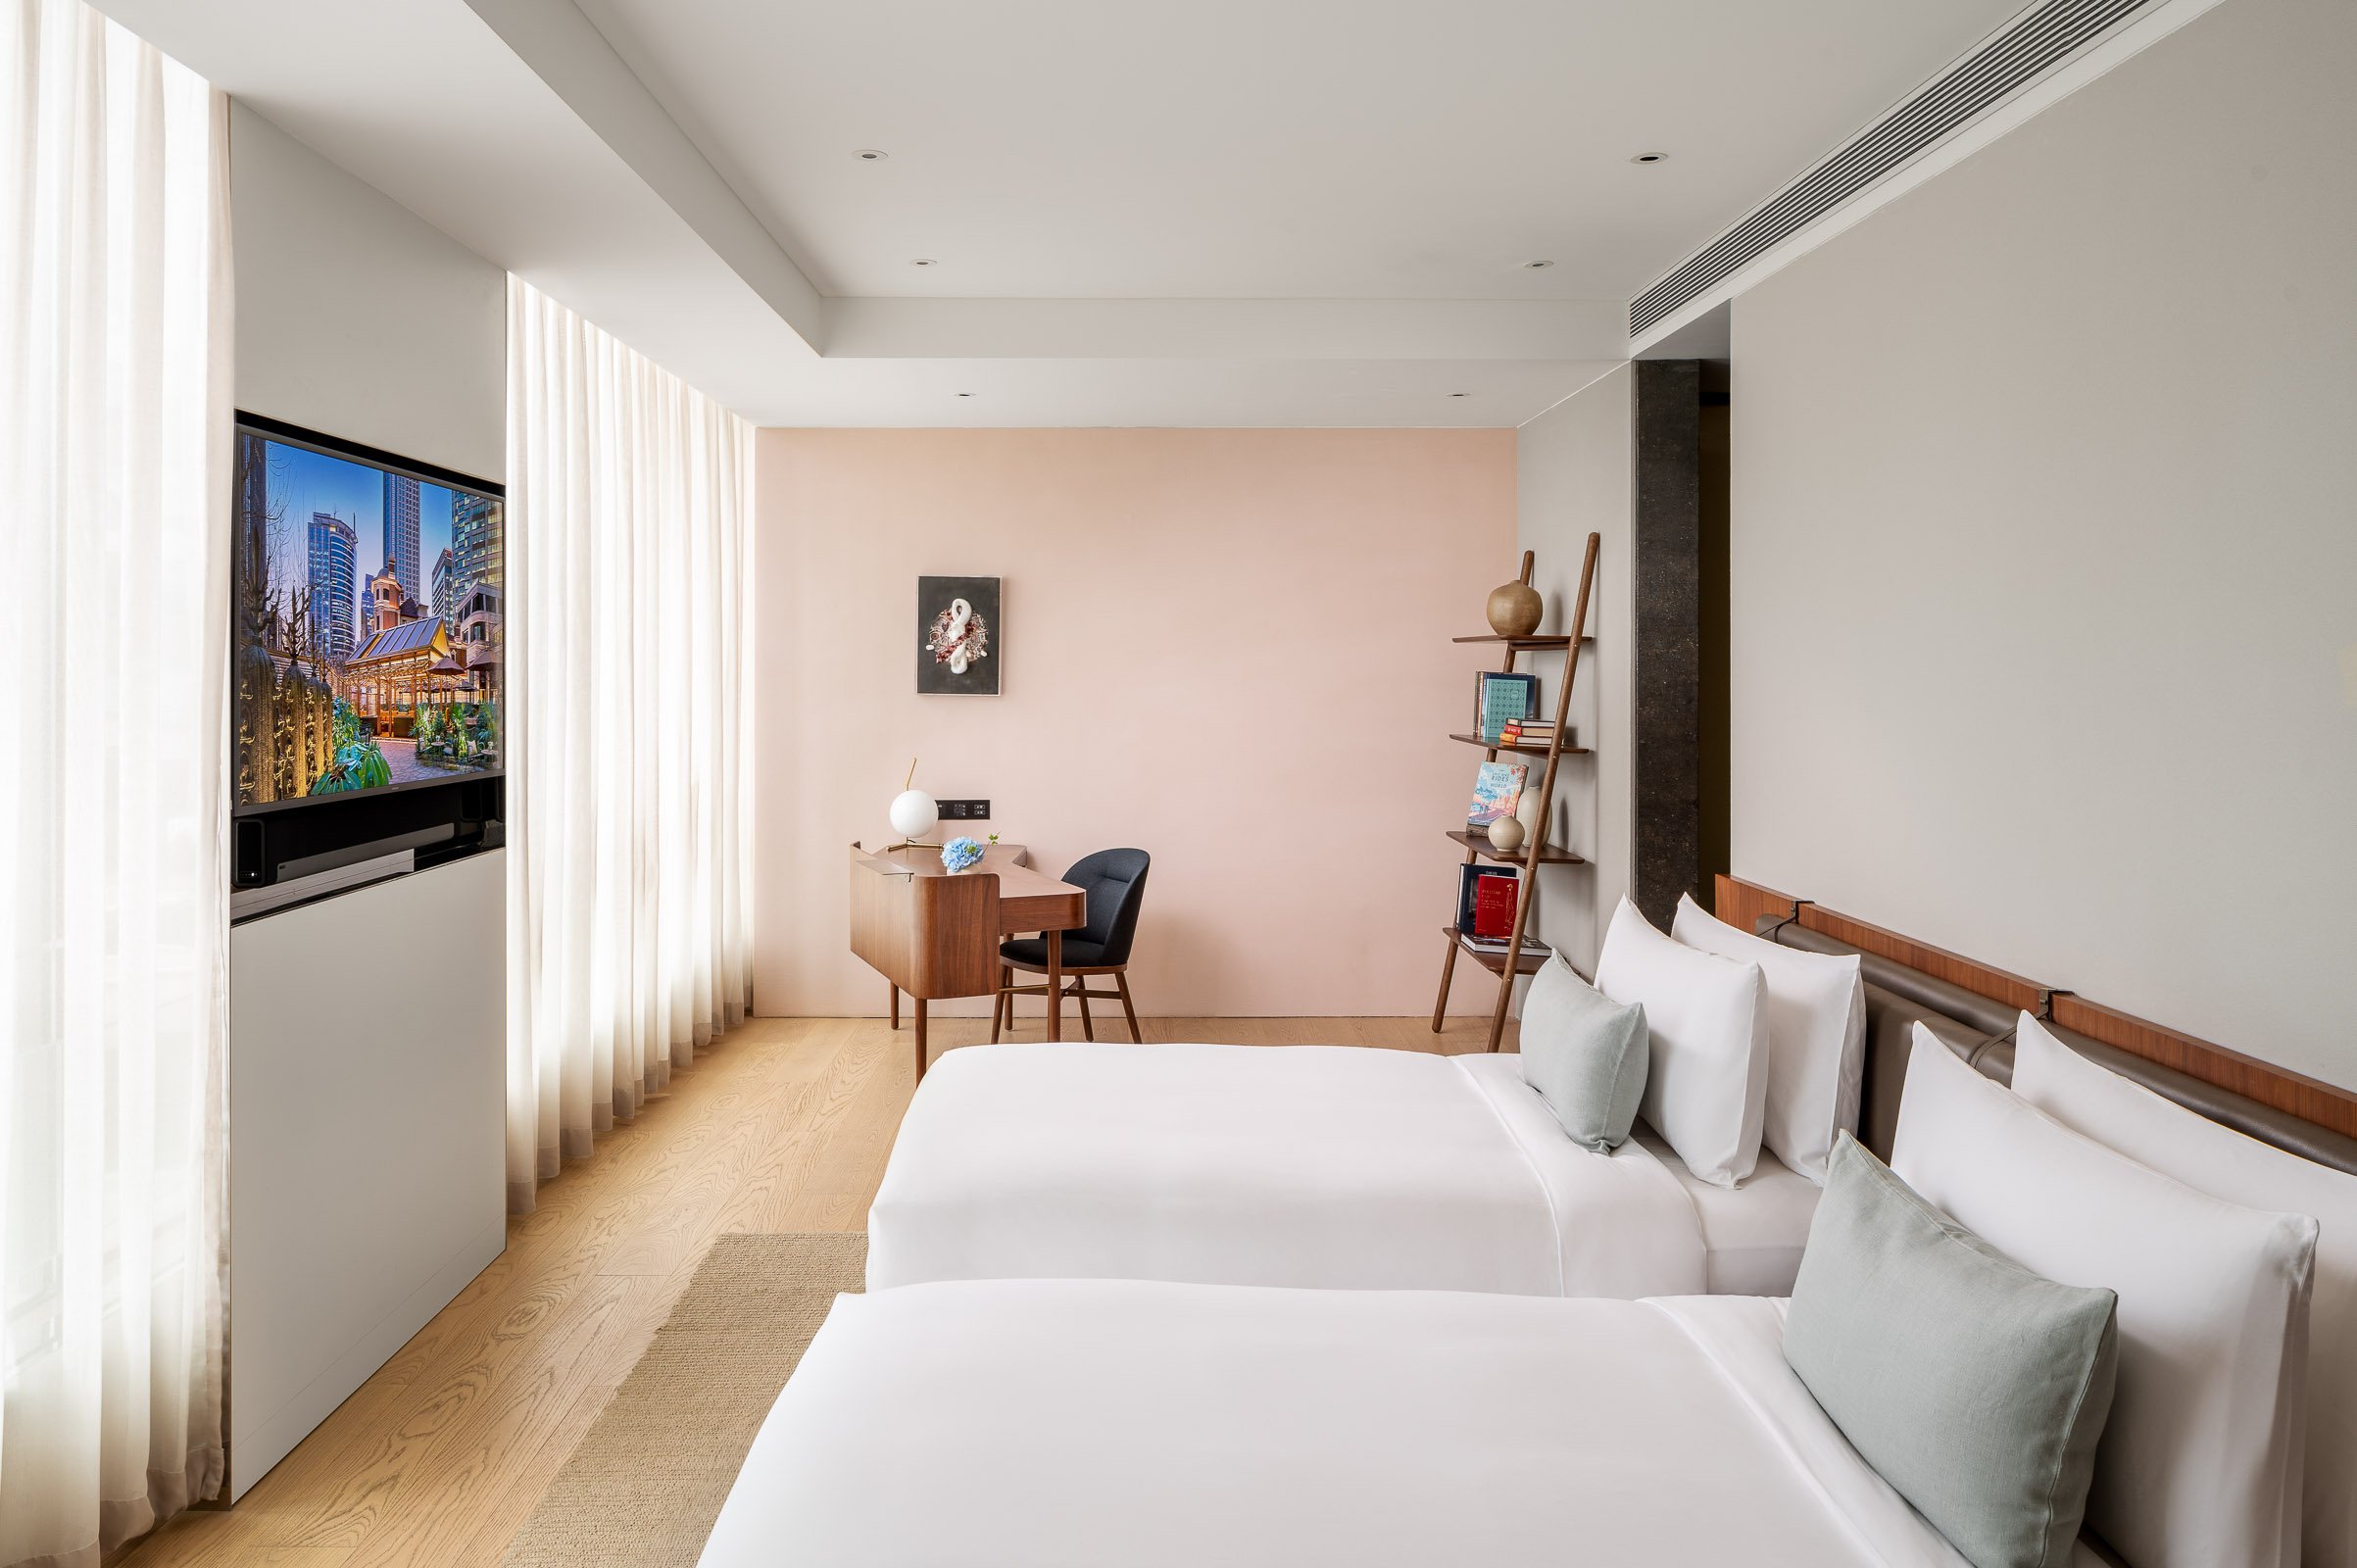  The Sukhothai Shanghai, a contemporary lifestyle hotel under The Sukhothai Hotels &amp; Resorts of HKR International, is located in the coveted Jing’an district, marking a chapter of the prestigious international hotel and resort group as their firs